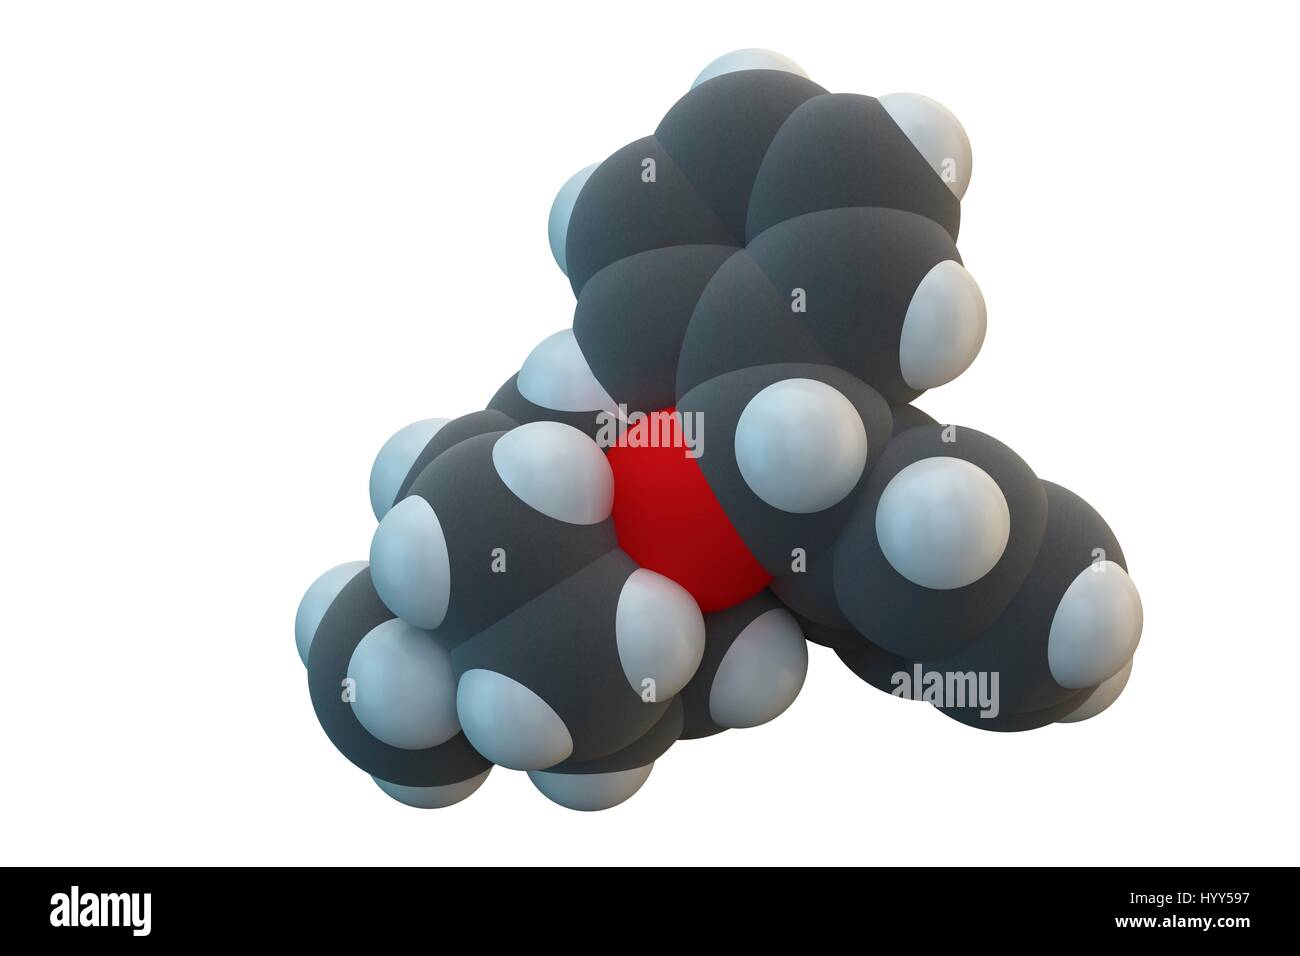 Benzatropine (benztropine) anticholinergic drug molecule. Used in treatment of Parkinson's disease and Parkinsonism. Chemical formula is C21H25NO. Atoms are represented as spheres: carbon (grey), hydrogen (white), nitrogen (blue), oxygen (red). Illustration. Stock Photo